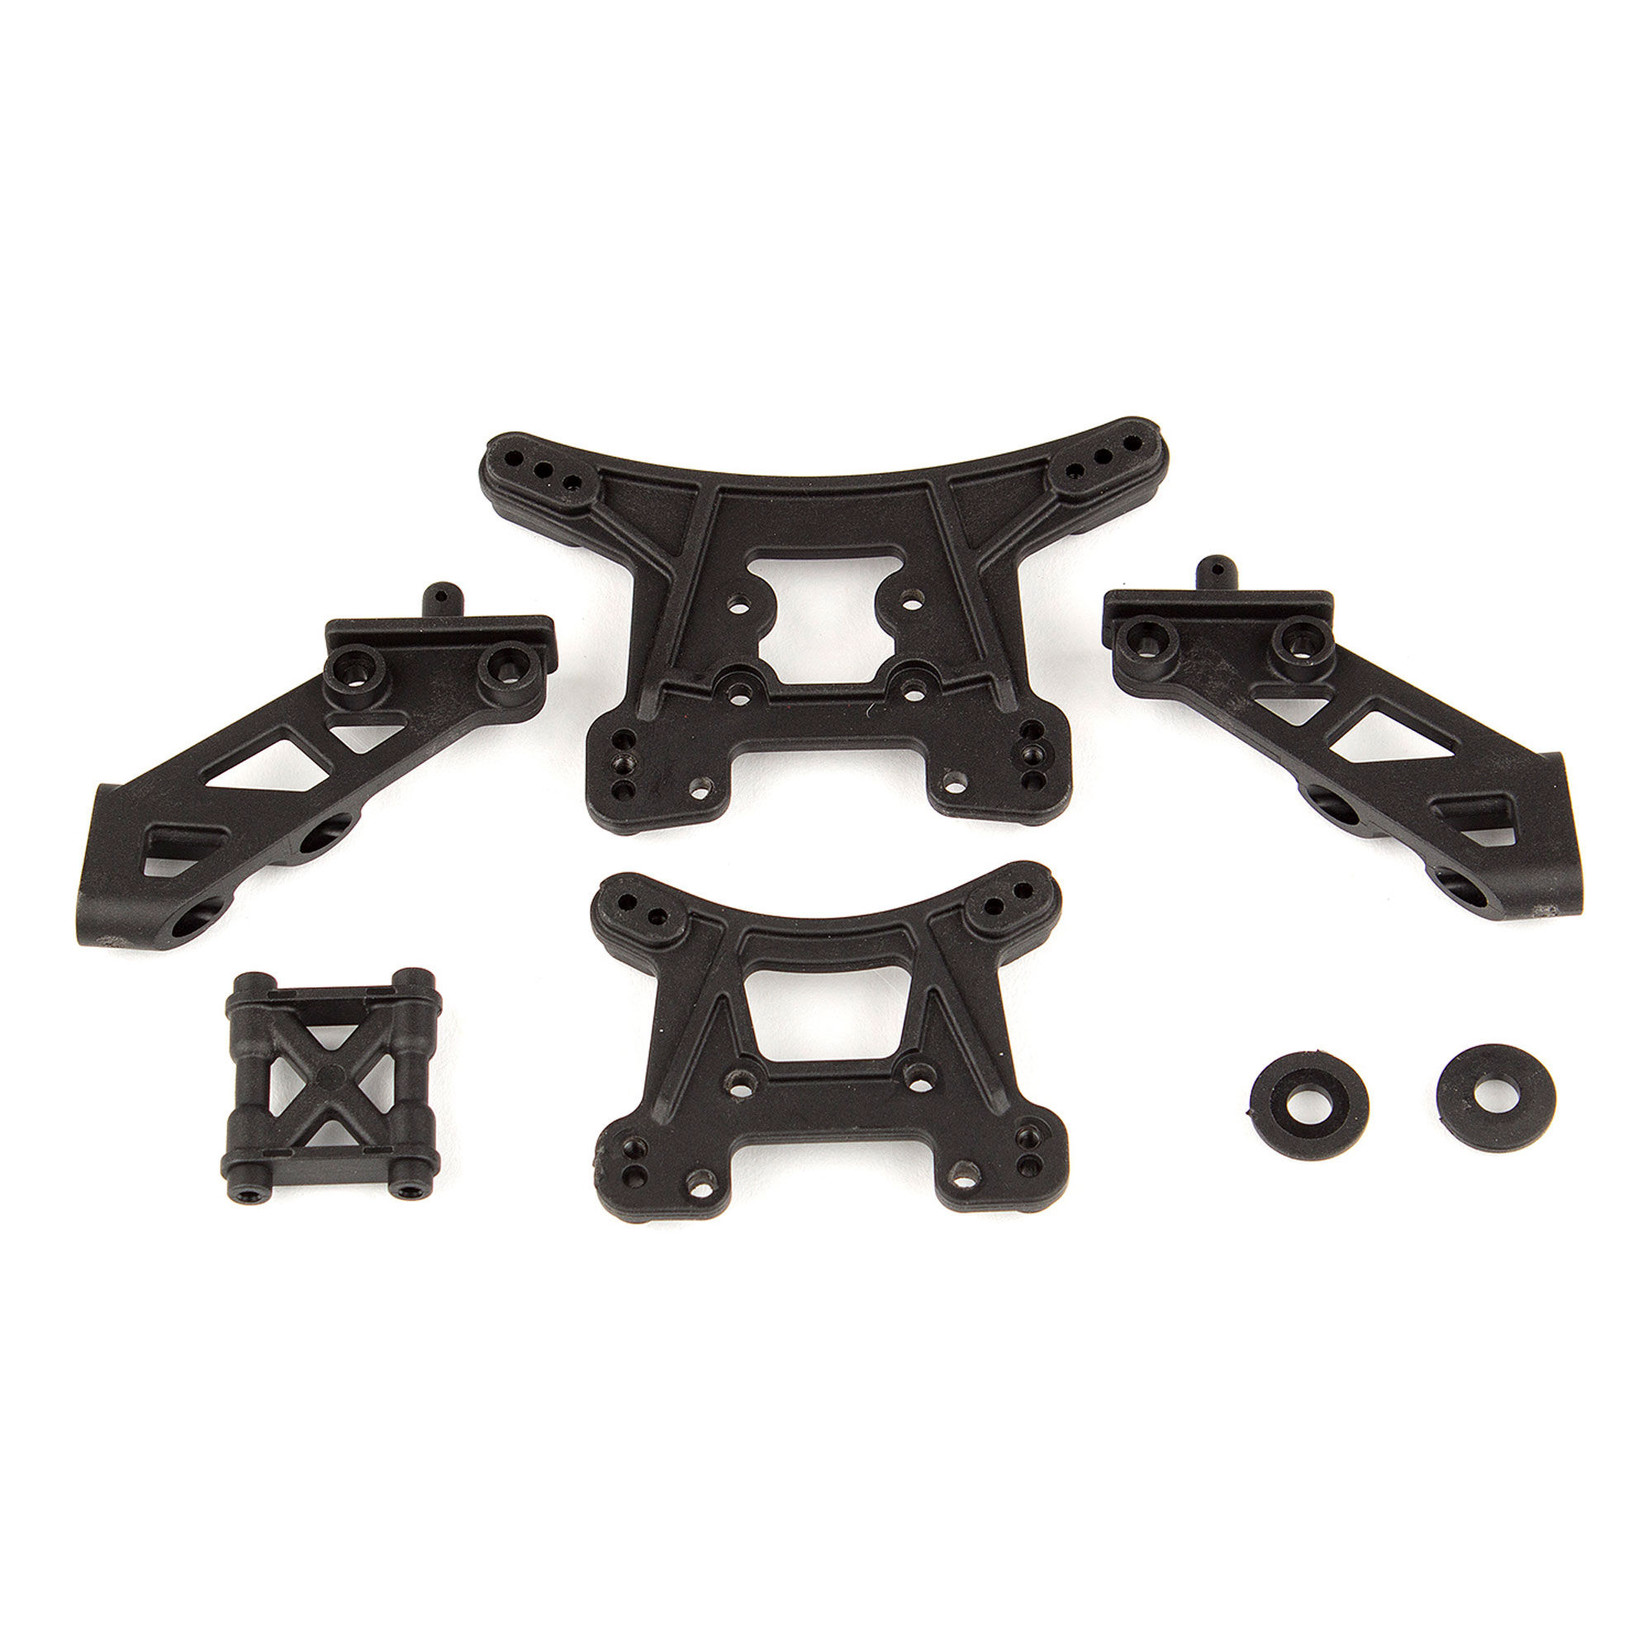 Team Associated Front and Rear Shock Towers & Wing Mounts: 14B, 14T